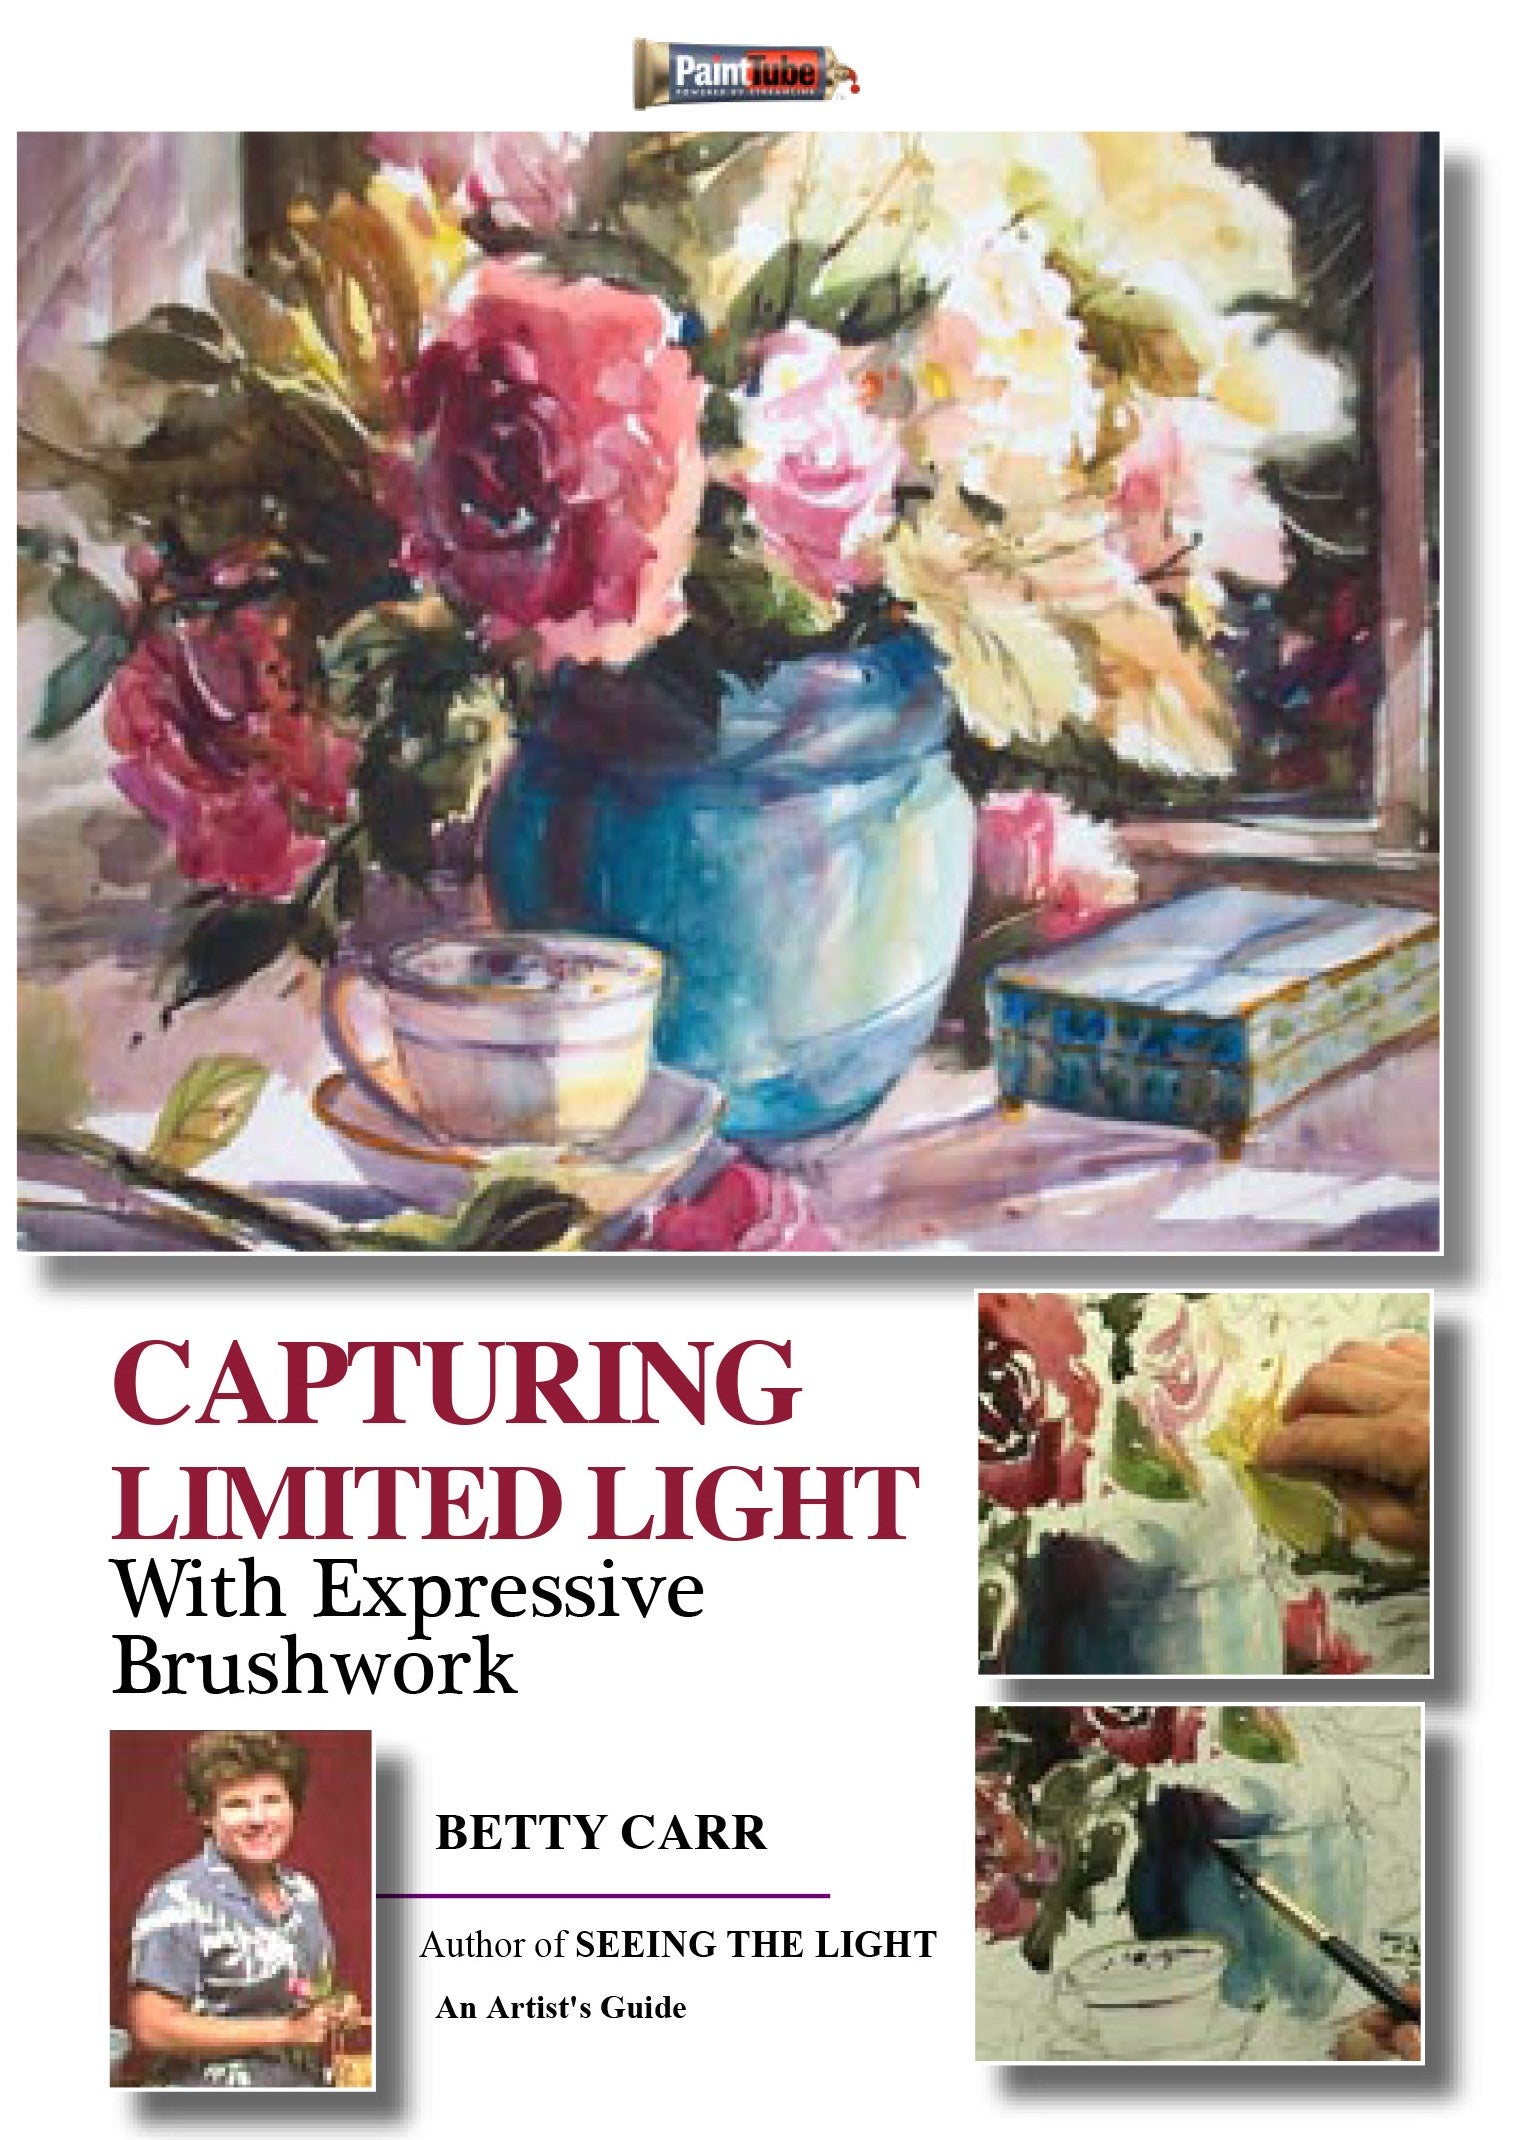 Betty Carr: Capturing Limited Light with Expressive Brushwork